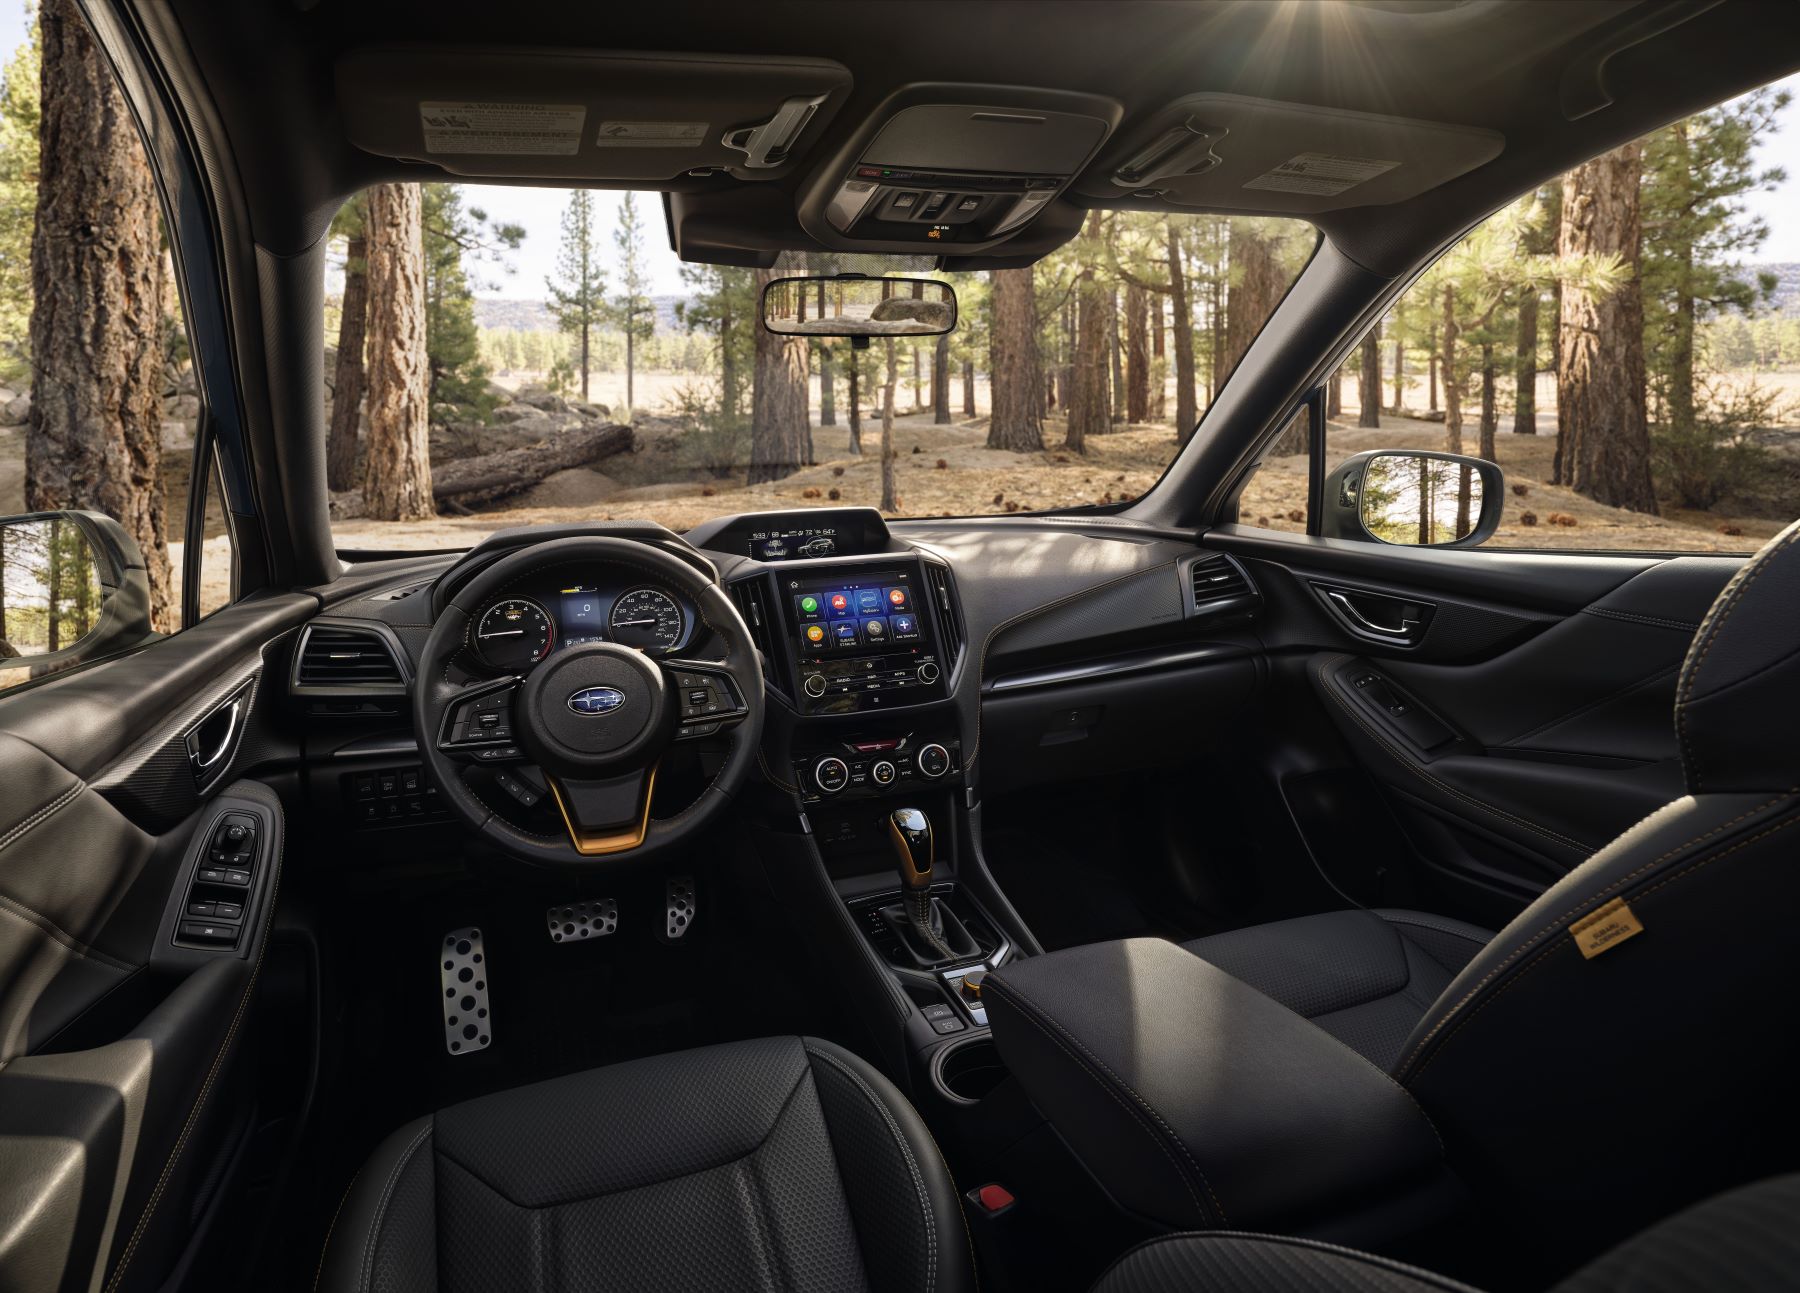 The interior and dashboard layout of a 2023 Subaru Forester compact crossover SUV